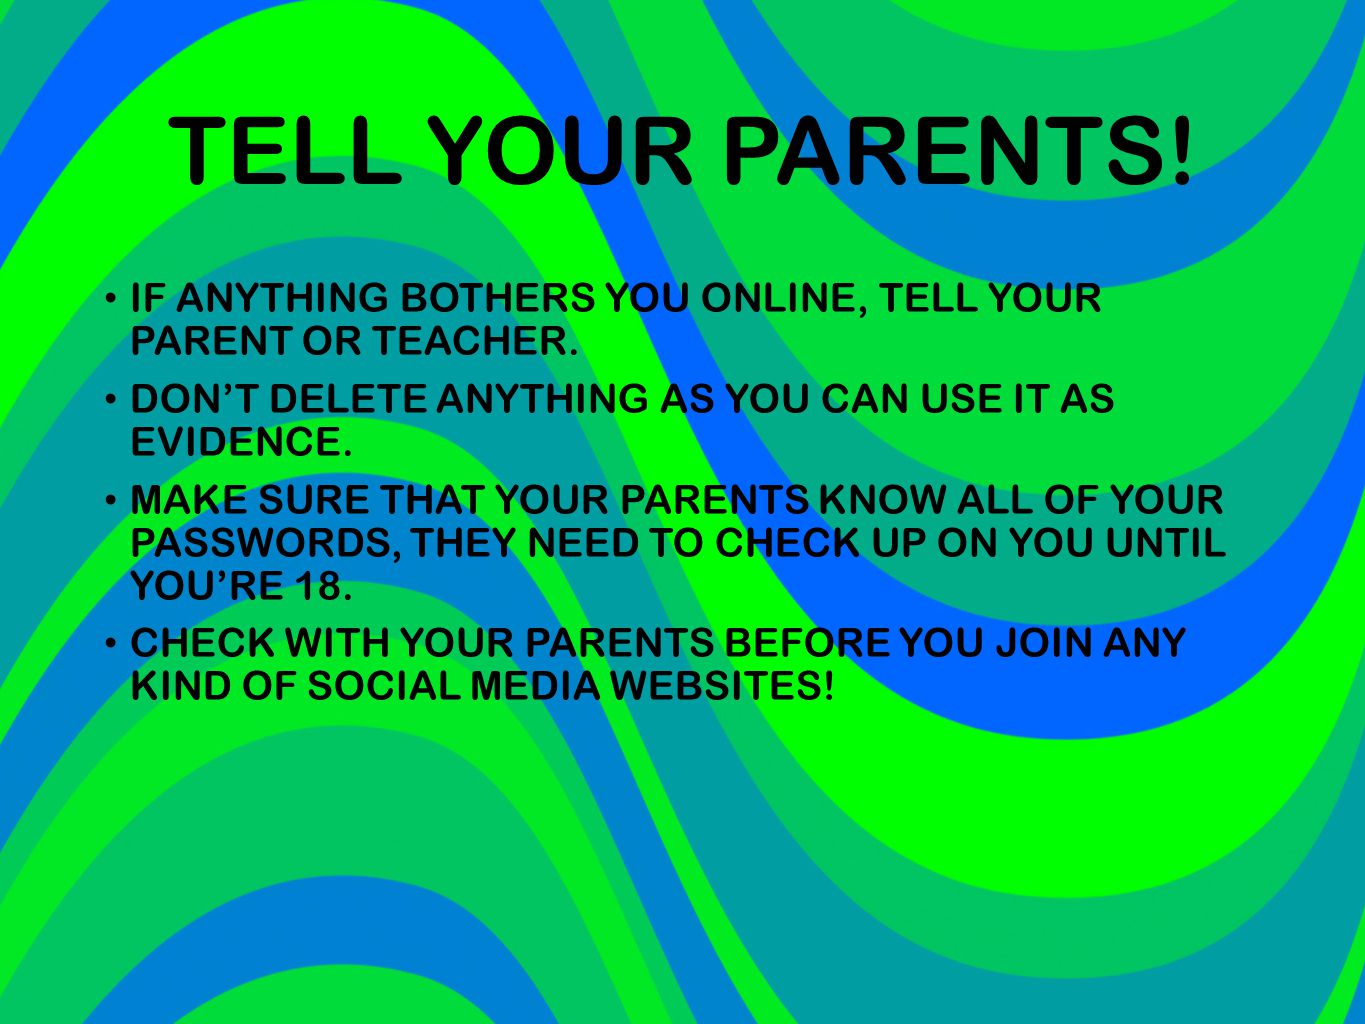 TELL YOUR PARENTS! IF ANYTHING BOTHERS YOU ONLINE, TELL YOUR PARENT OR TEACHER. DON’T DELETE ANYTHING AS YOU CAN USE IT AS EVIDENCE.